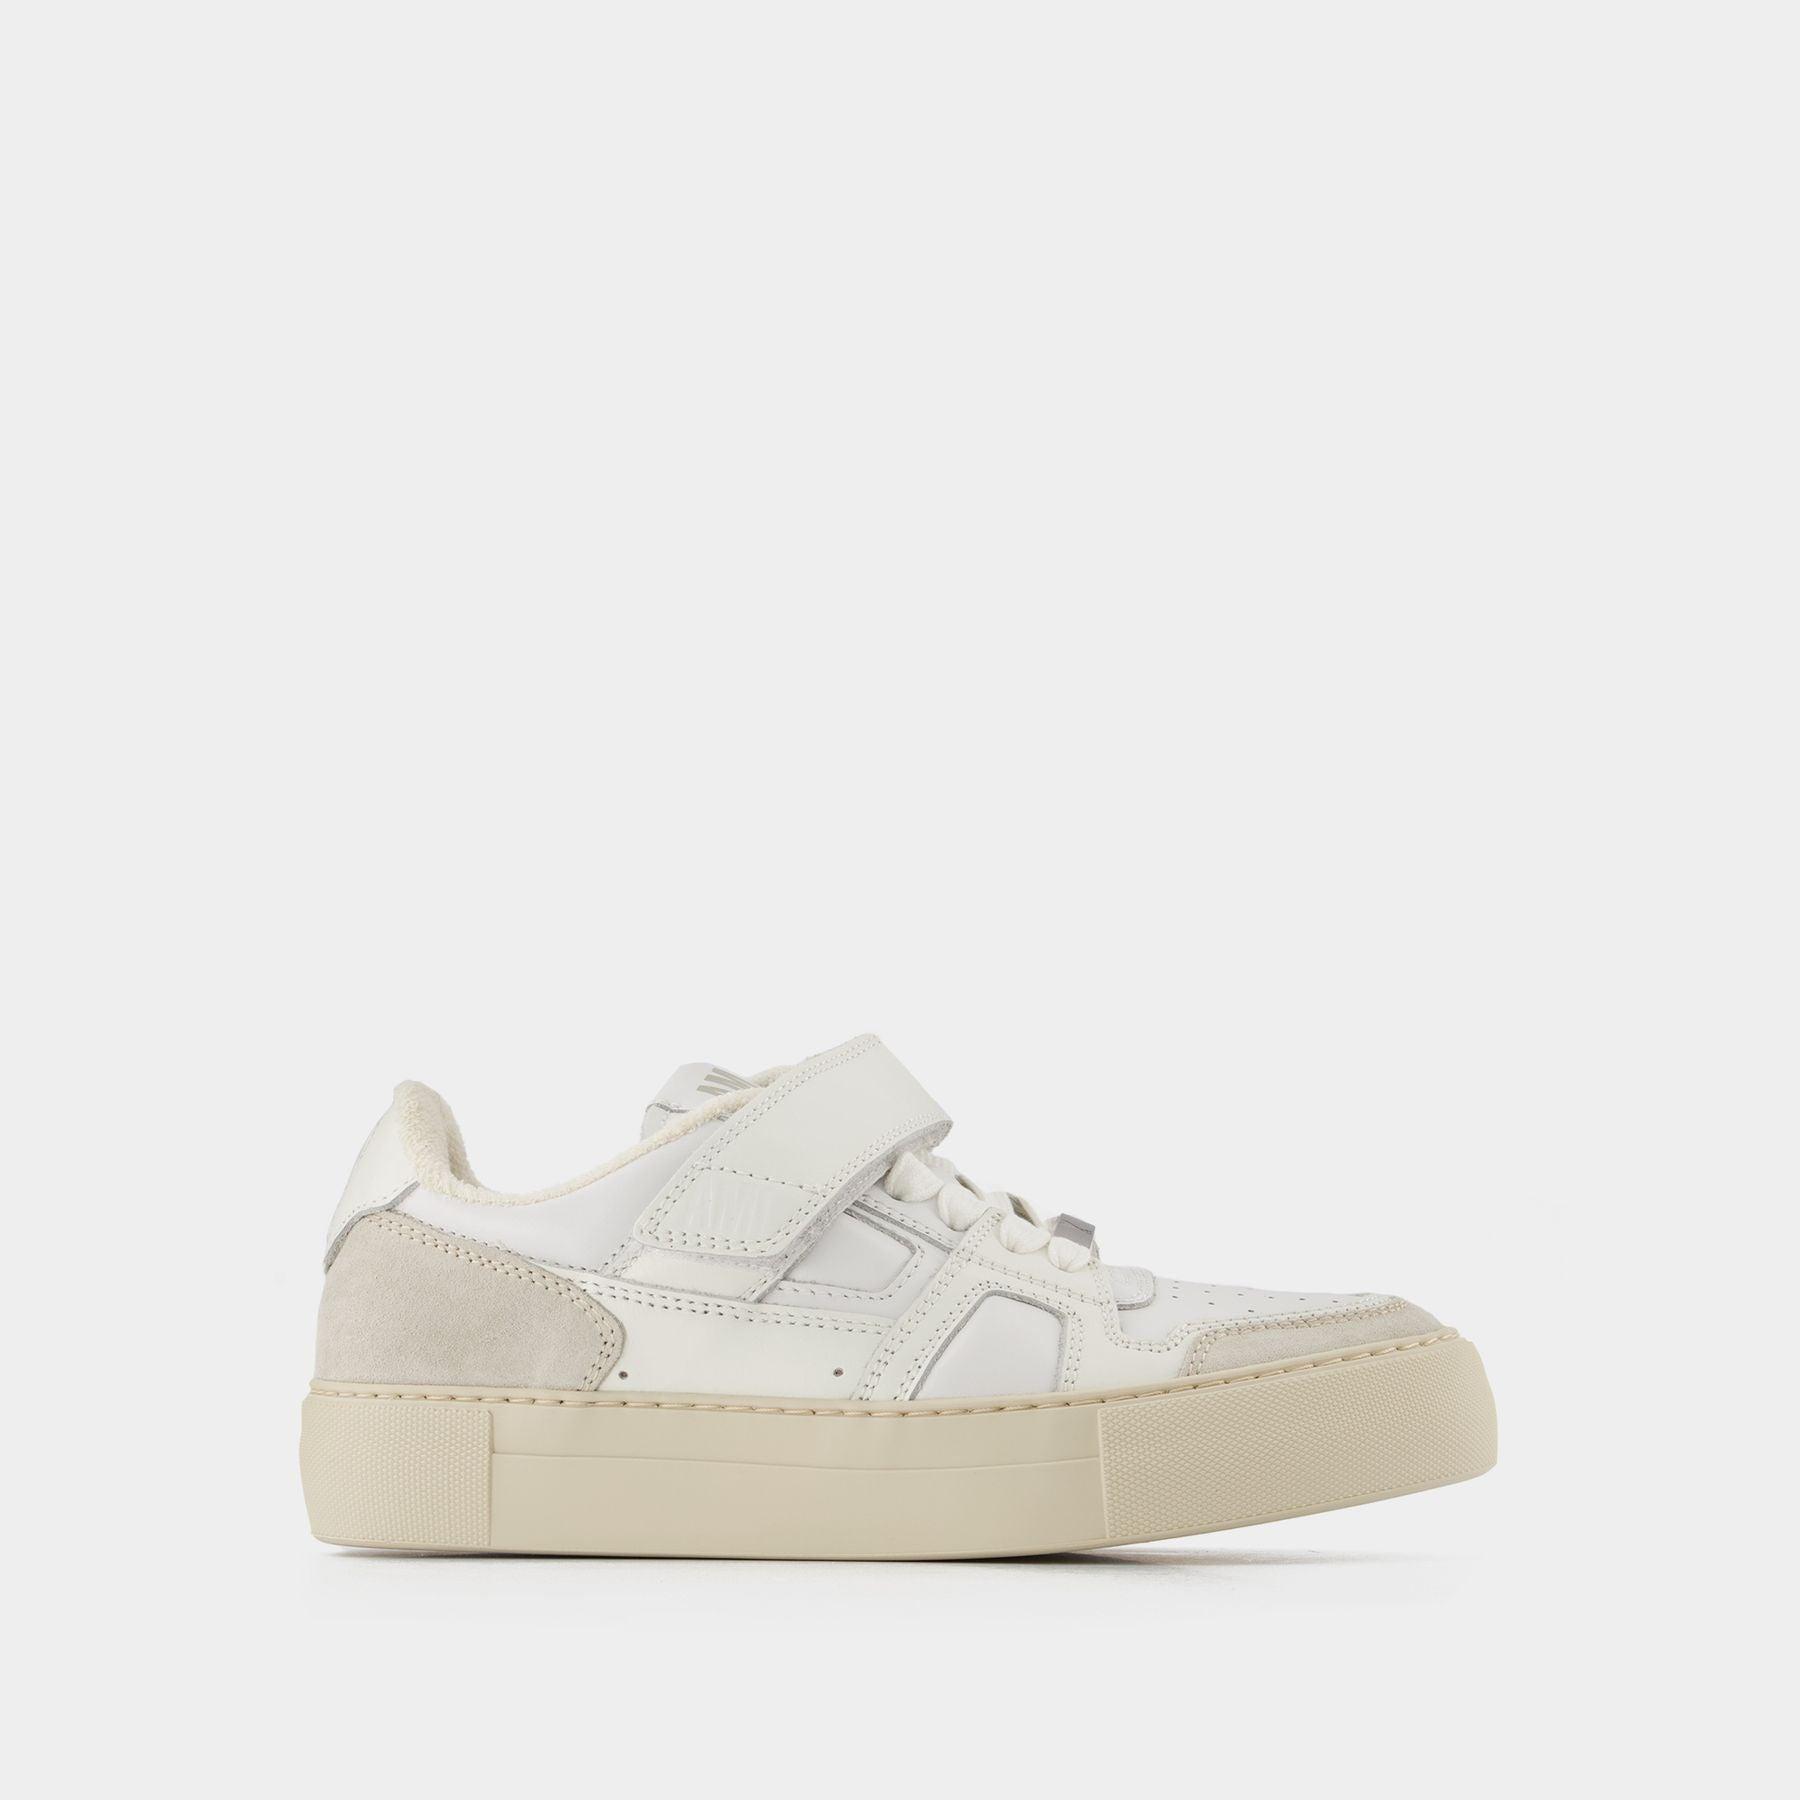 Ami Paris Low Top Ami Arcade Snk Sneakers - - White - Leather in ...